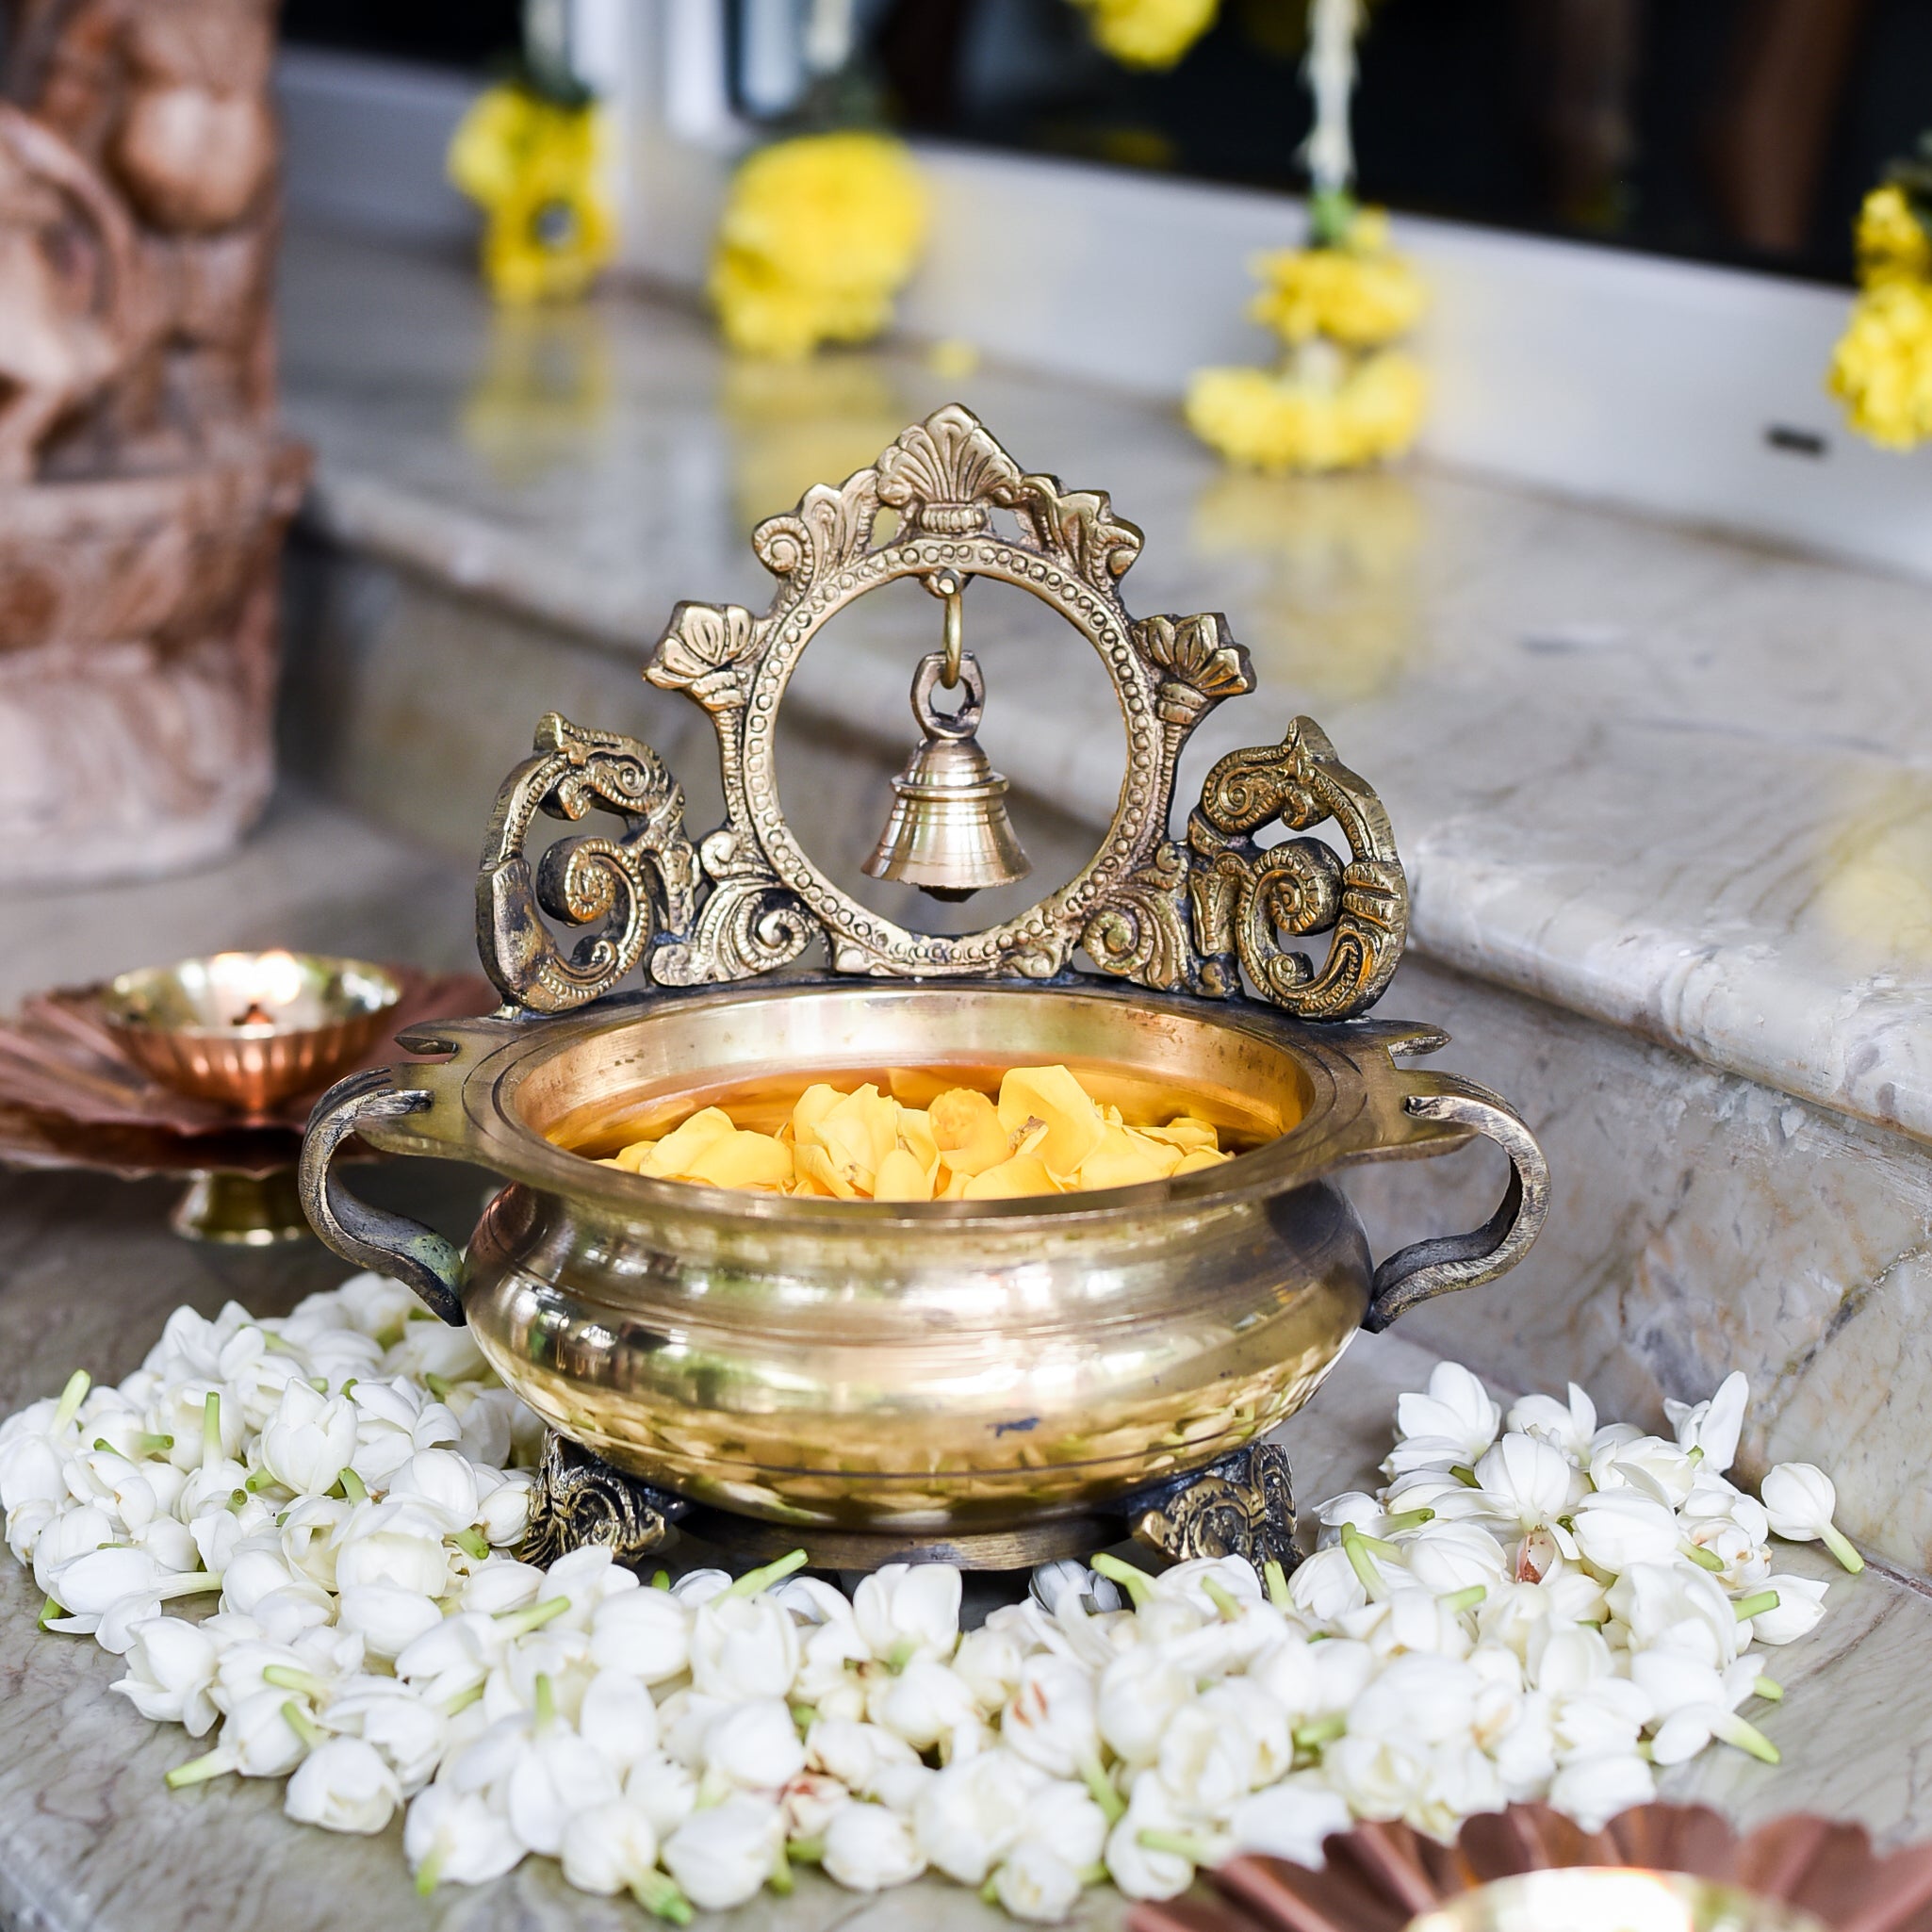 The Importance Of Metal In The Indian Culture – Samskara Home